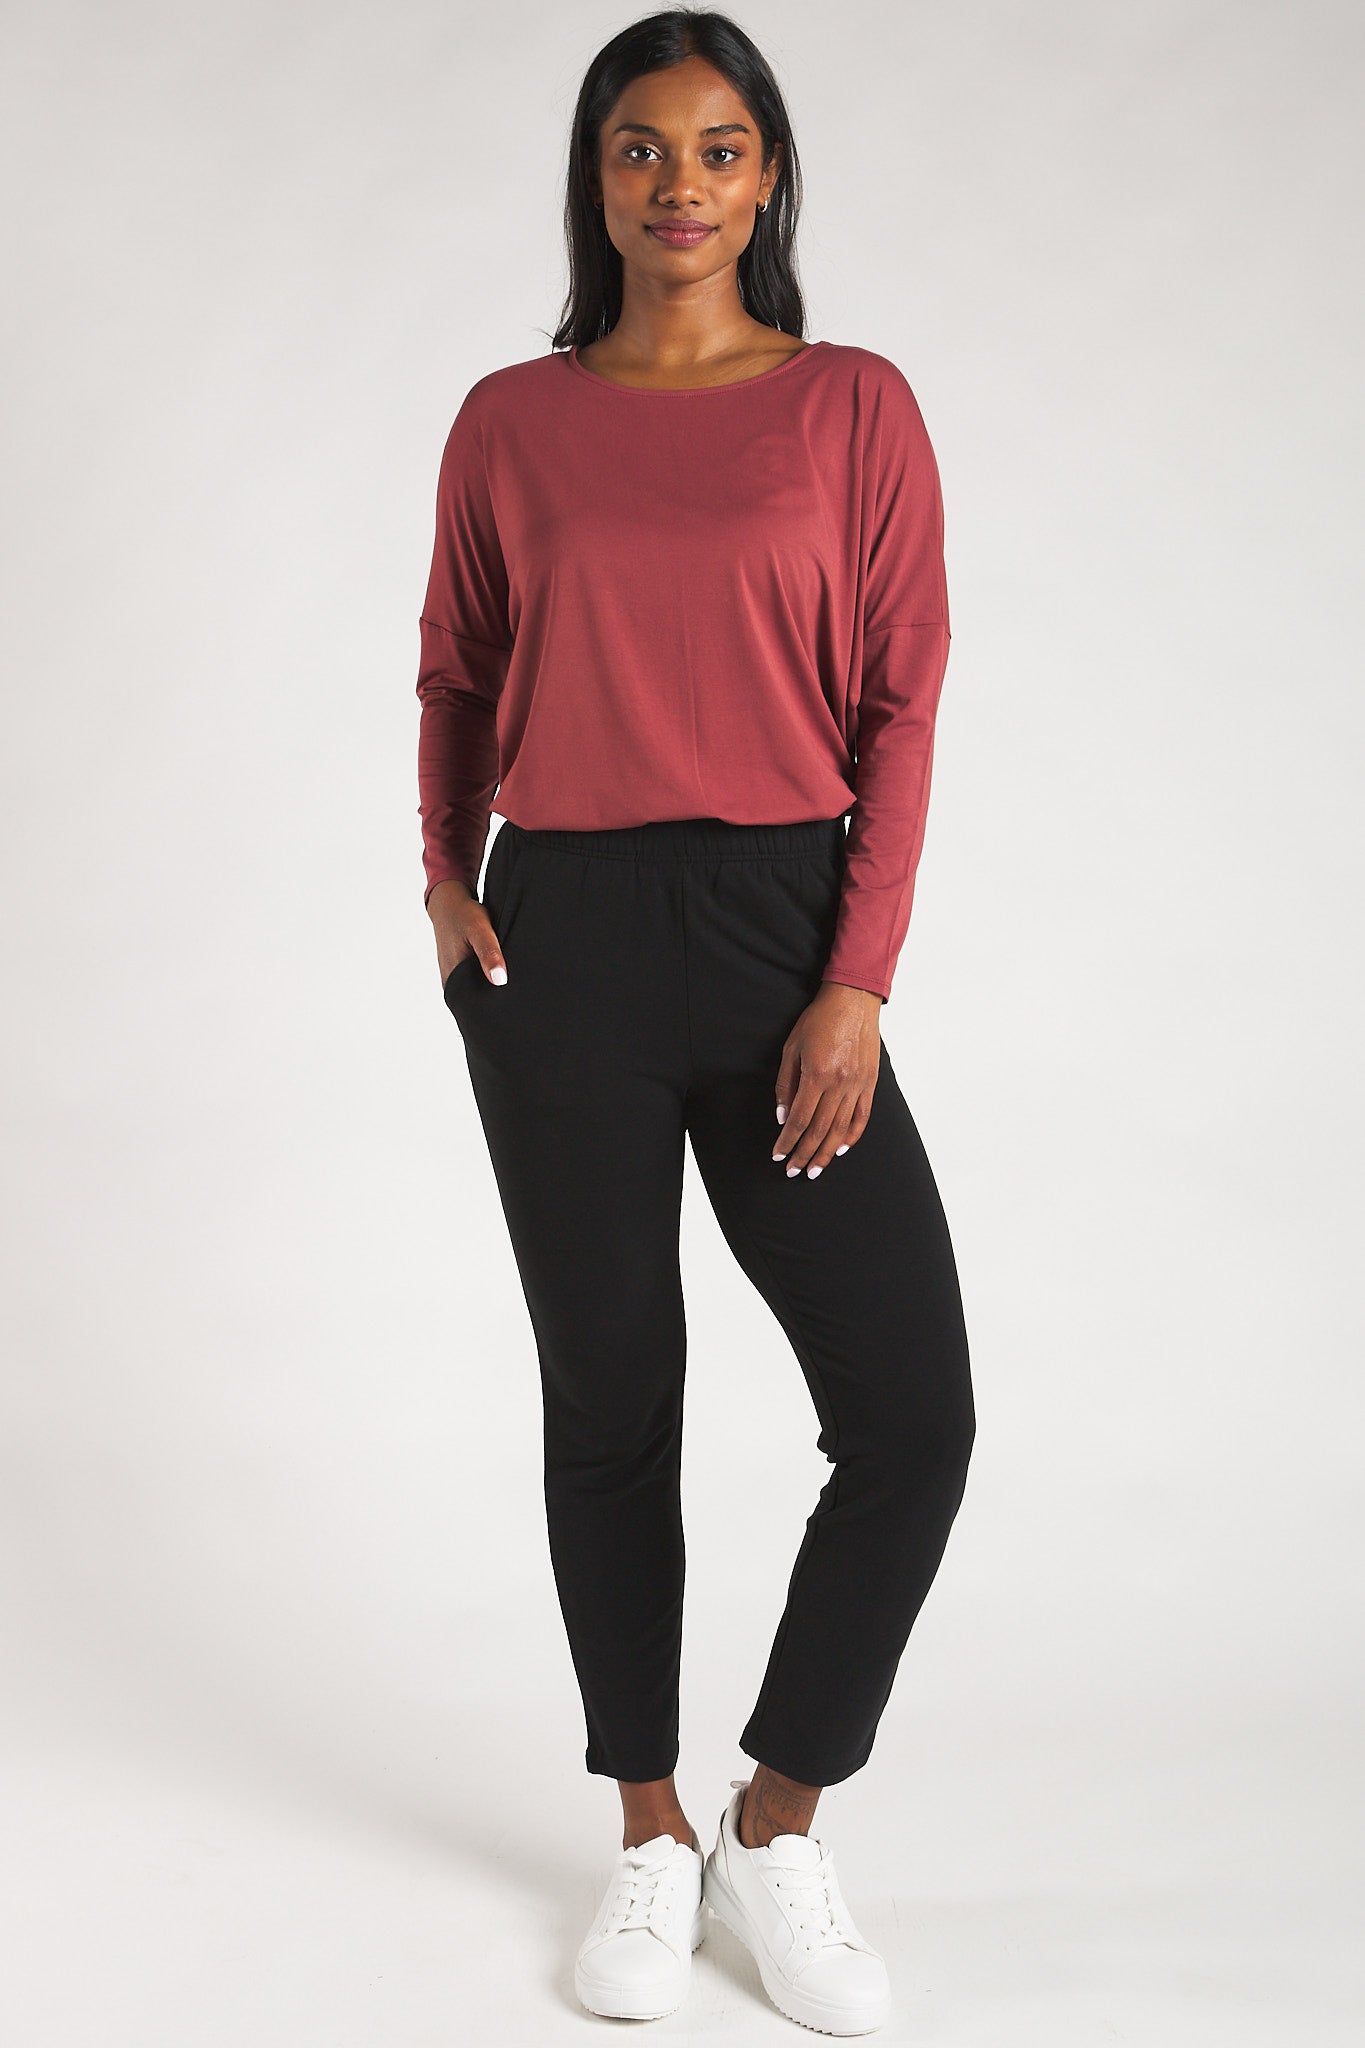 Woman styling a sustainable bamboo long sleeve top in Rosewood by Terrera.